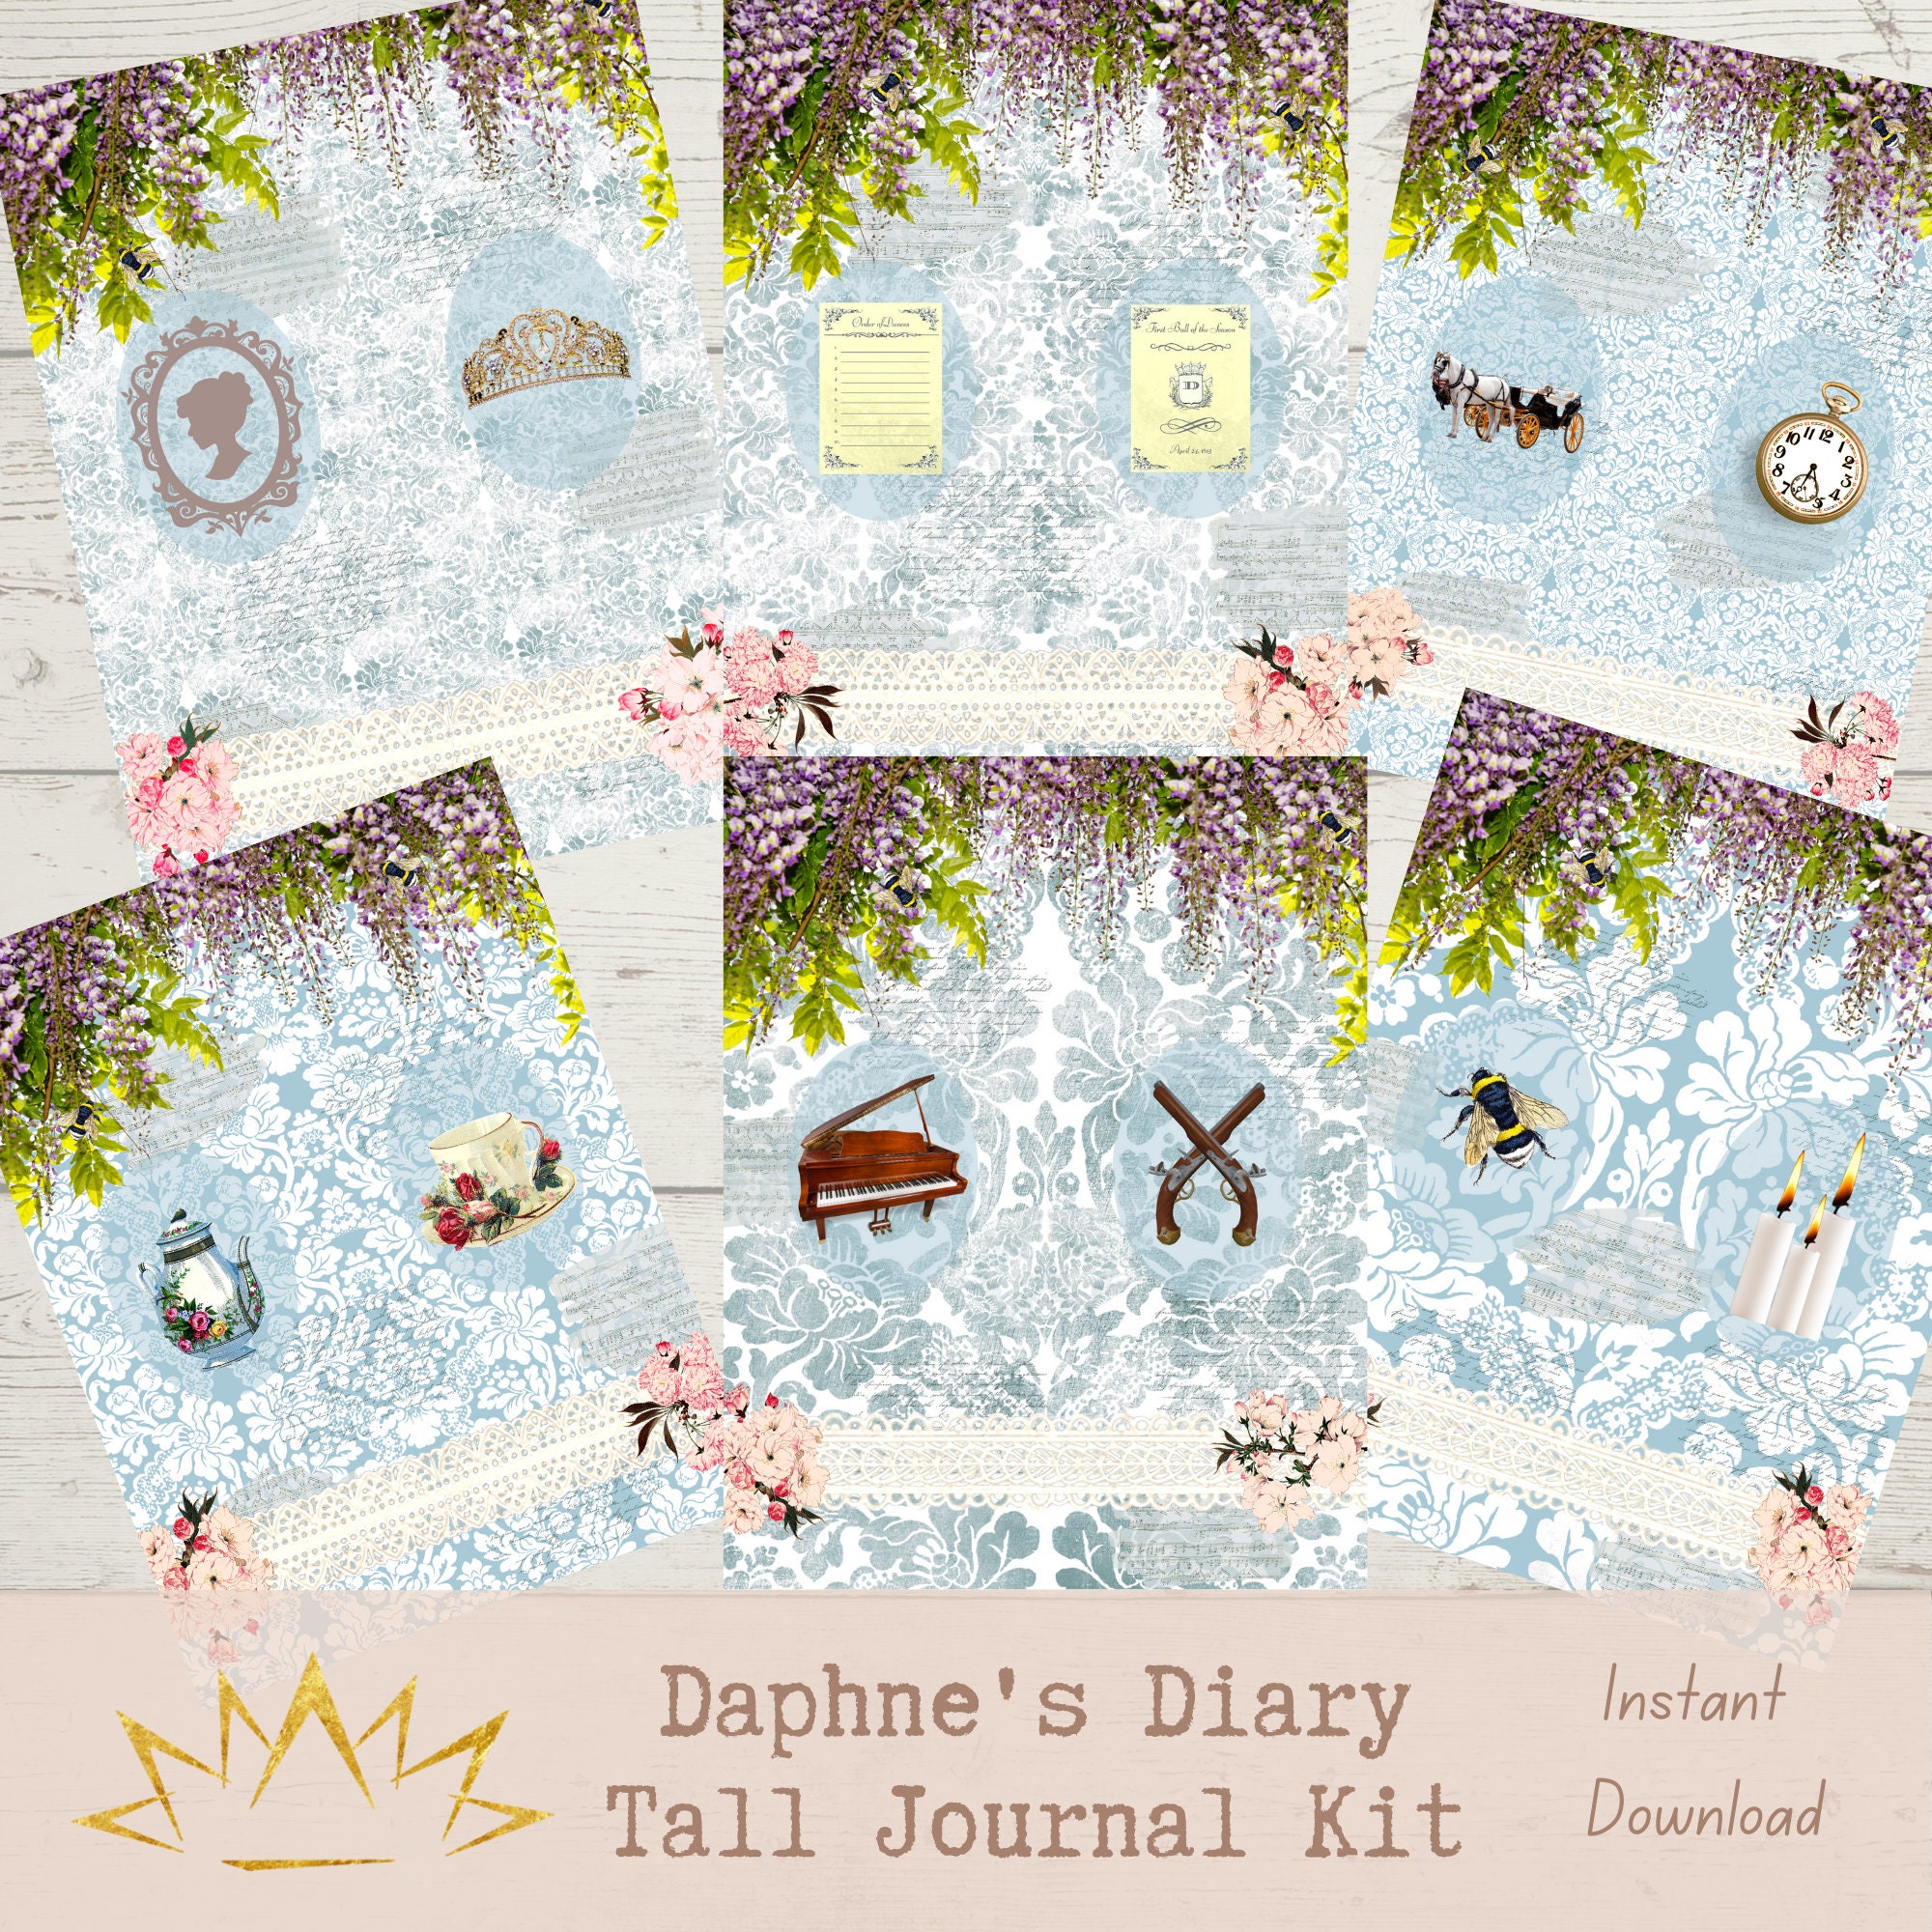 The Daphne's Diary Colouring book - Daphne's Diary English